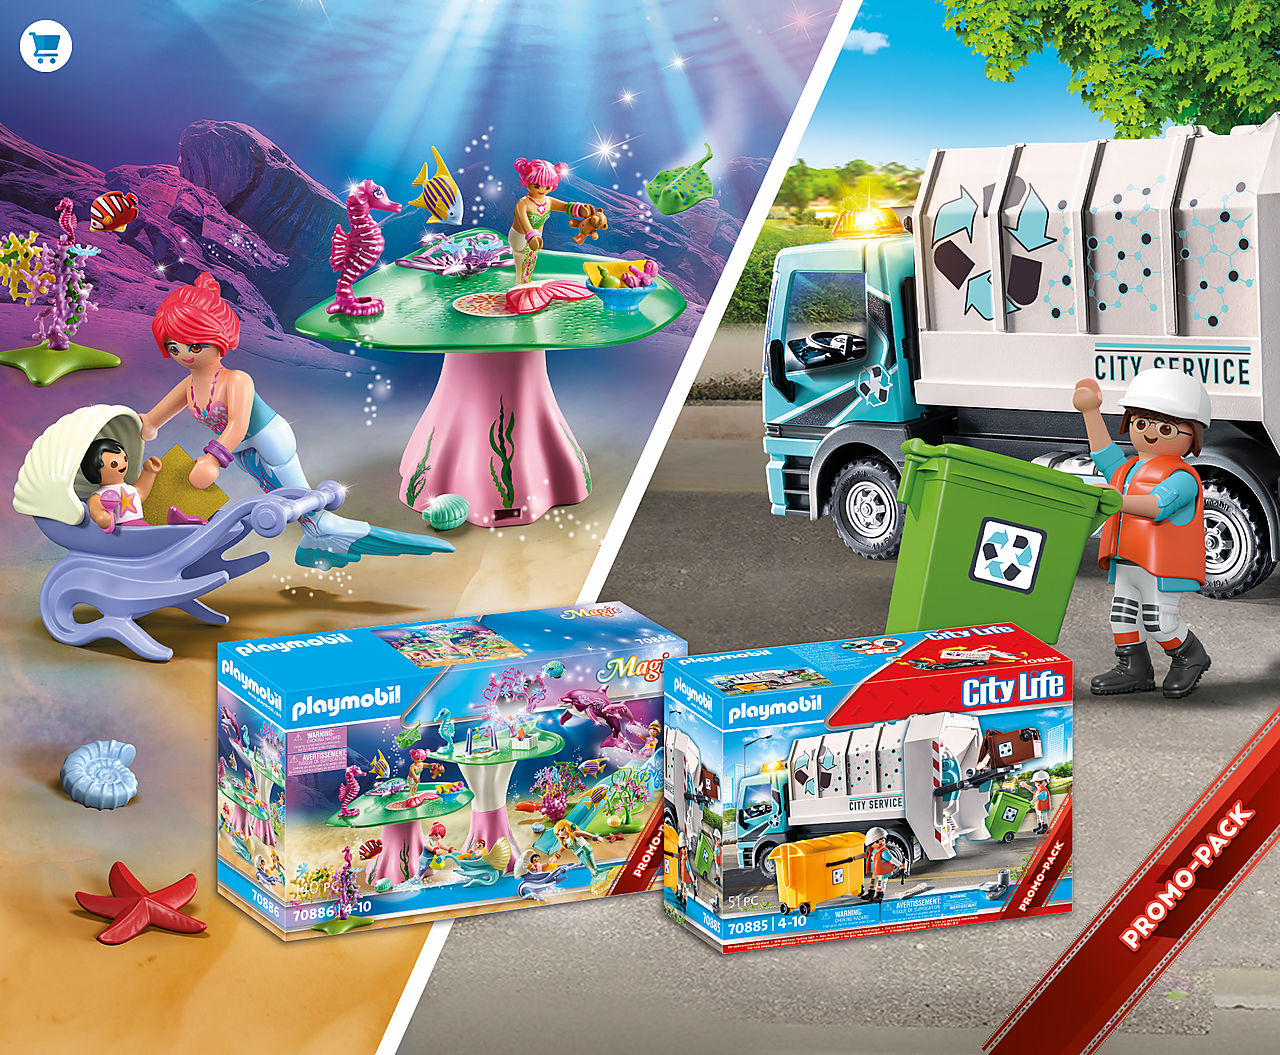 Discover the new Promo Packs like 70885 City Recycling Truck or 70886 Mermaids Daycare